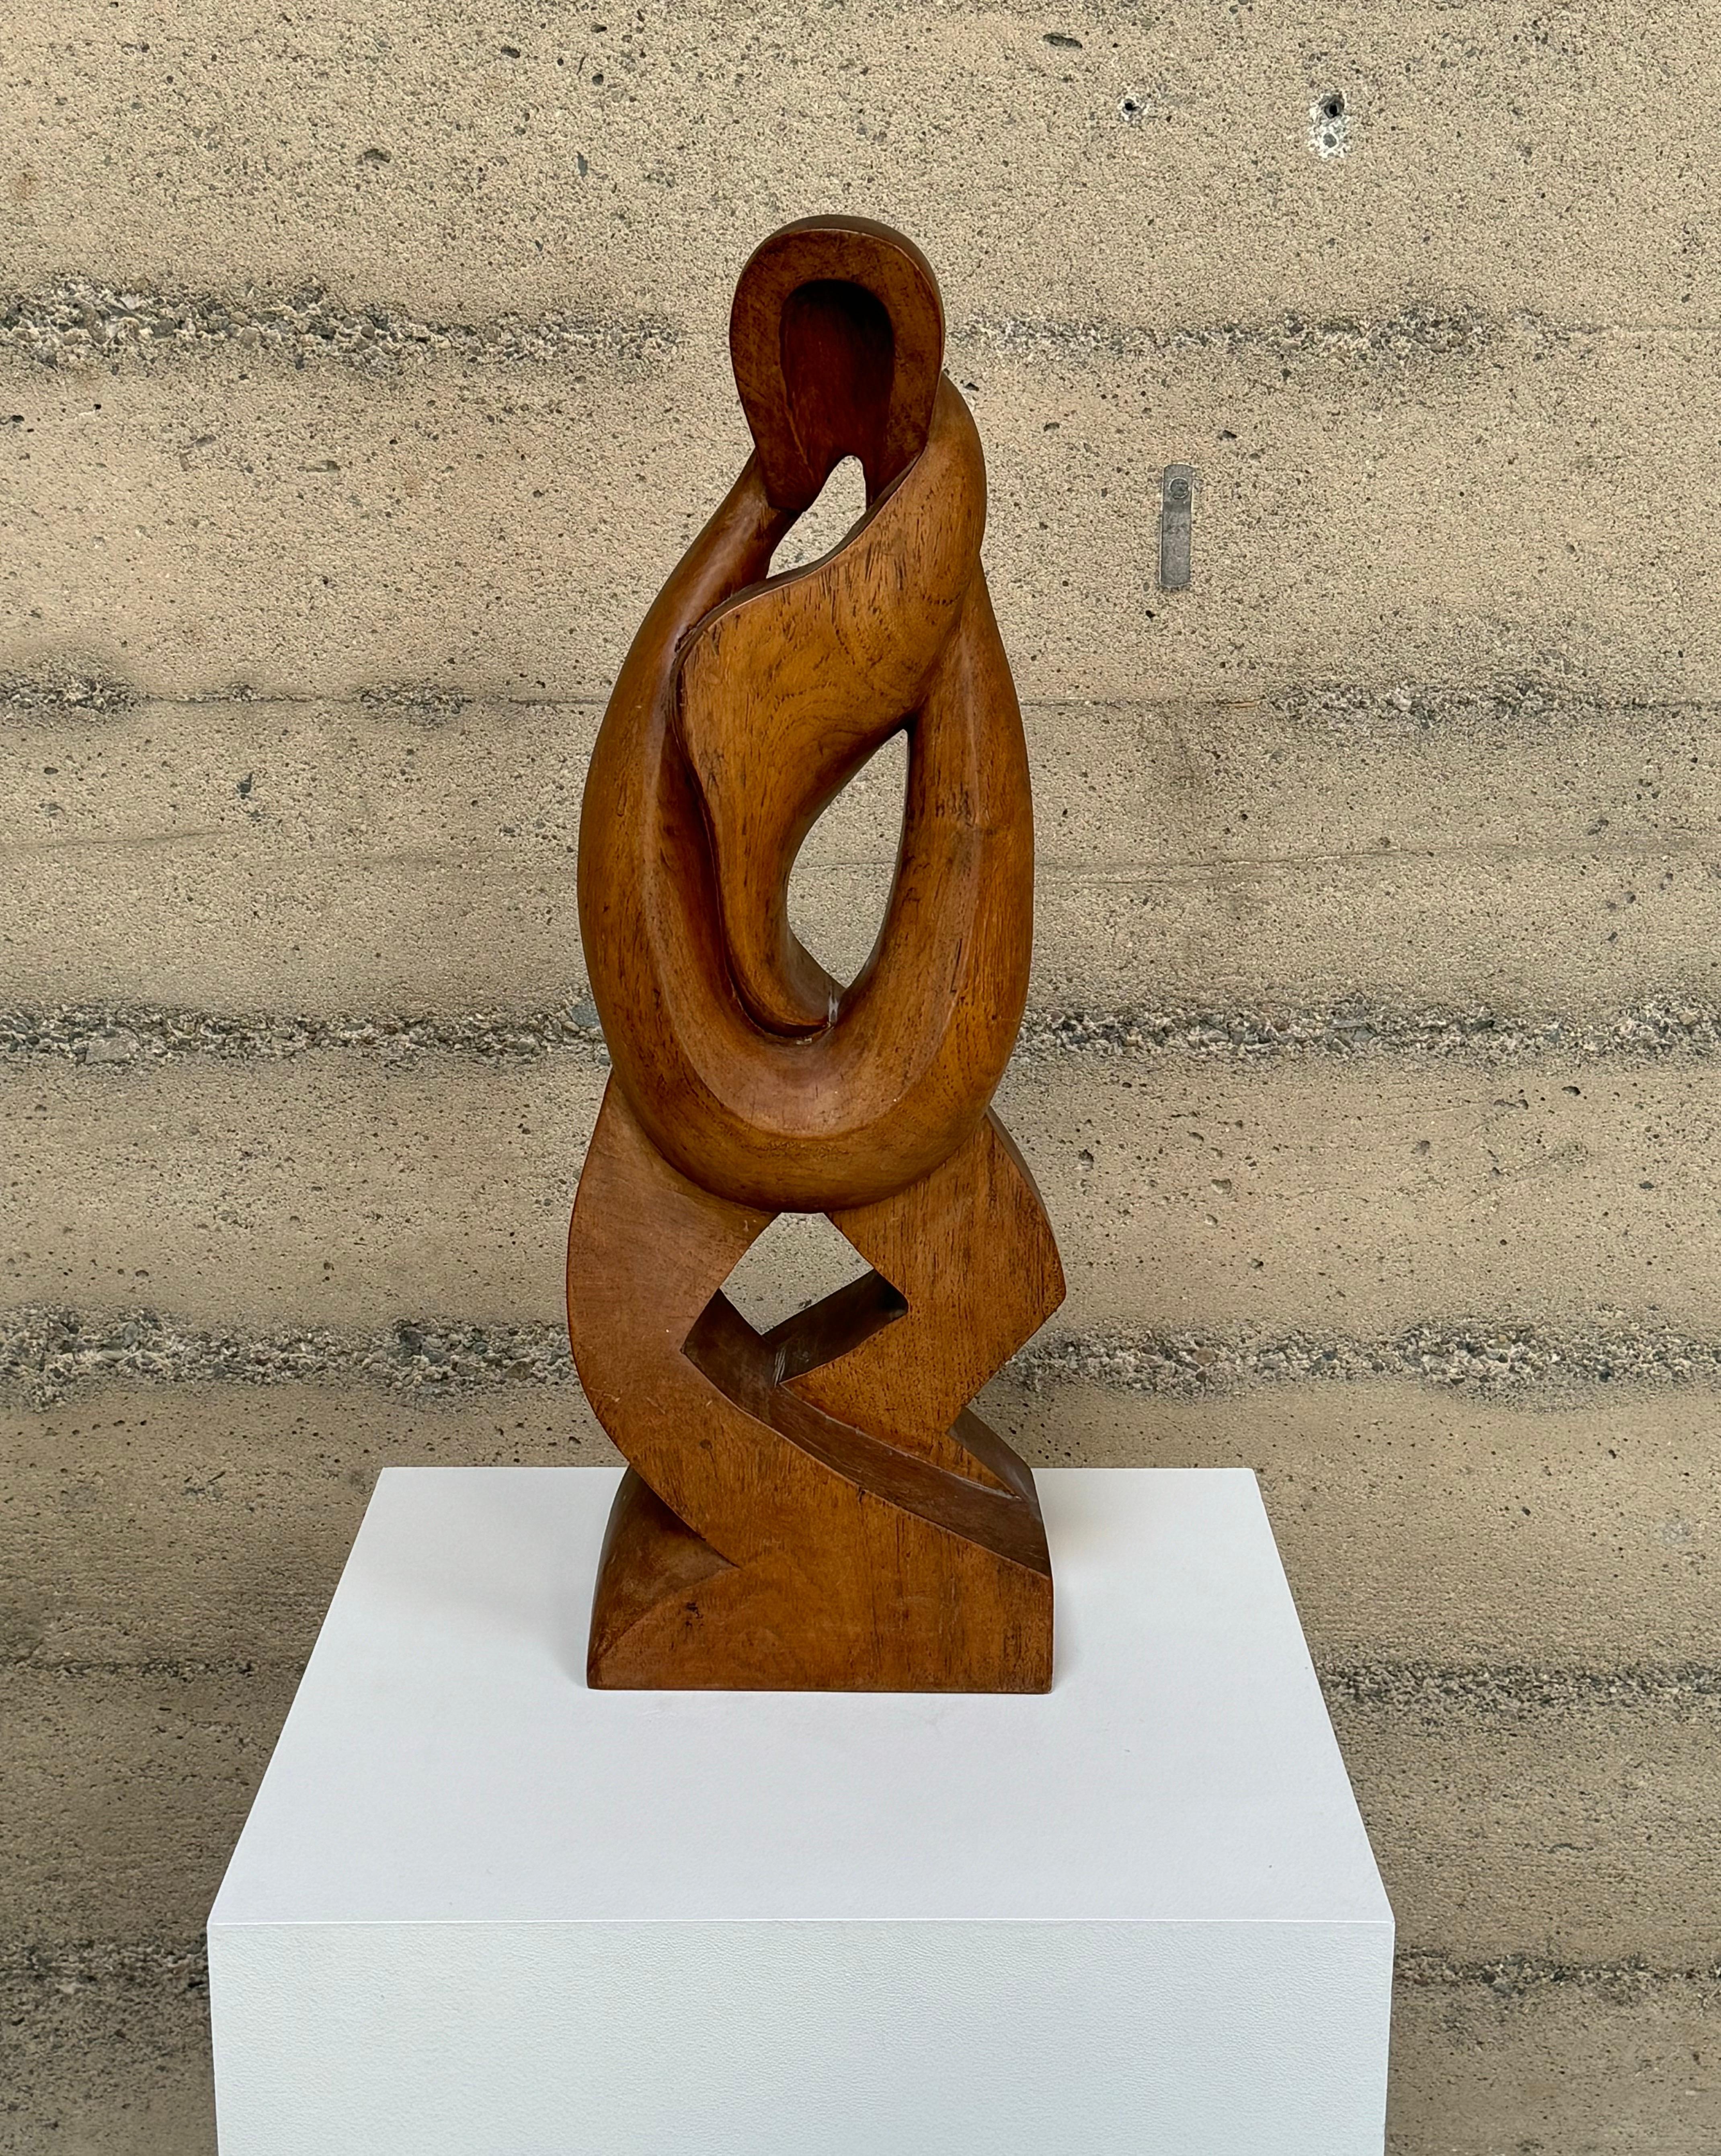 A 1950s modernist hand carved figurative abstract sculpture in walnut. A symmetrical form with flowing movement in its shape, starting from the top and with its culmination at its wide base, with nice graining to the walnut.